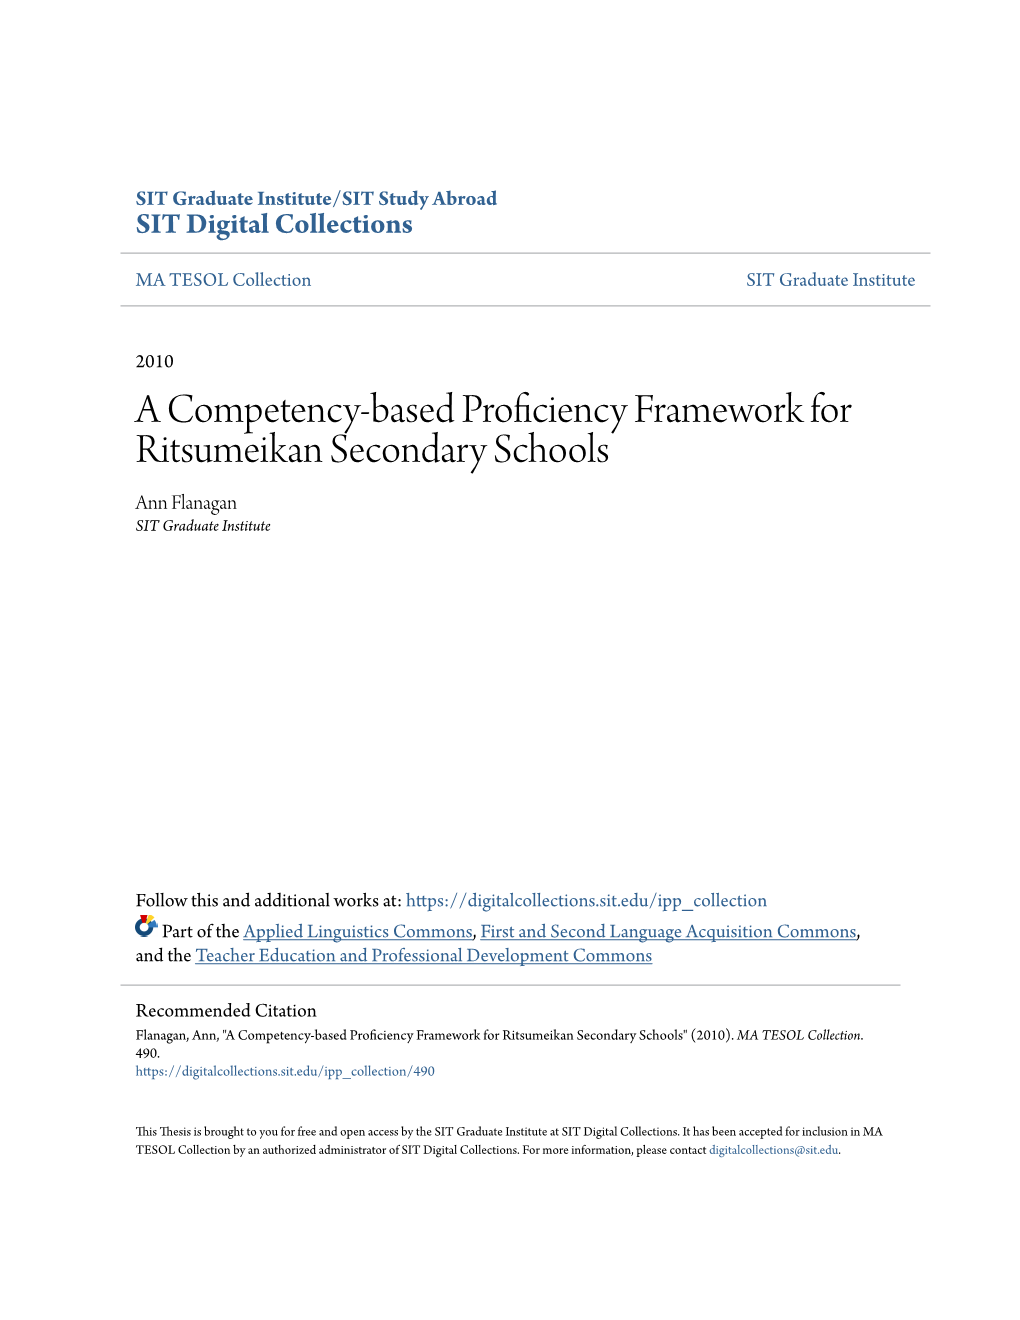 A Competency-Based Proficiency Framework for Ritsumeikan Secondary Schools Ann Flanagan SIT Graduate Institute